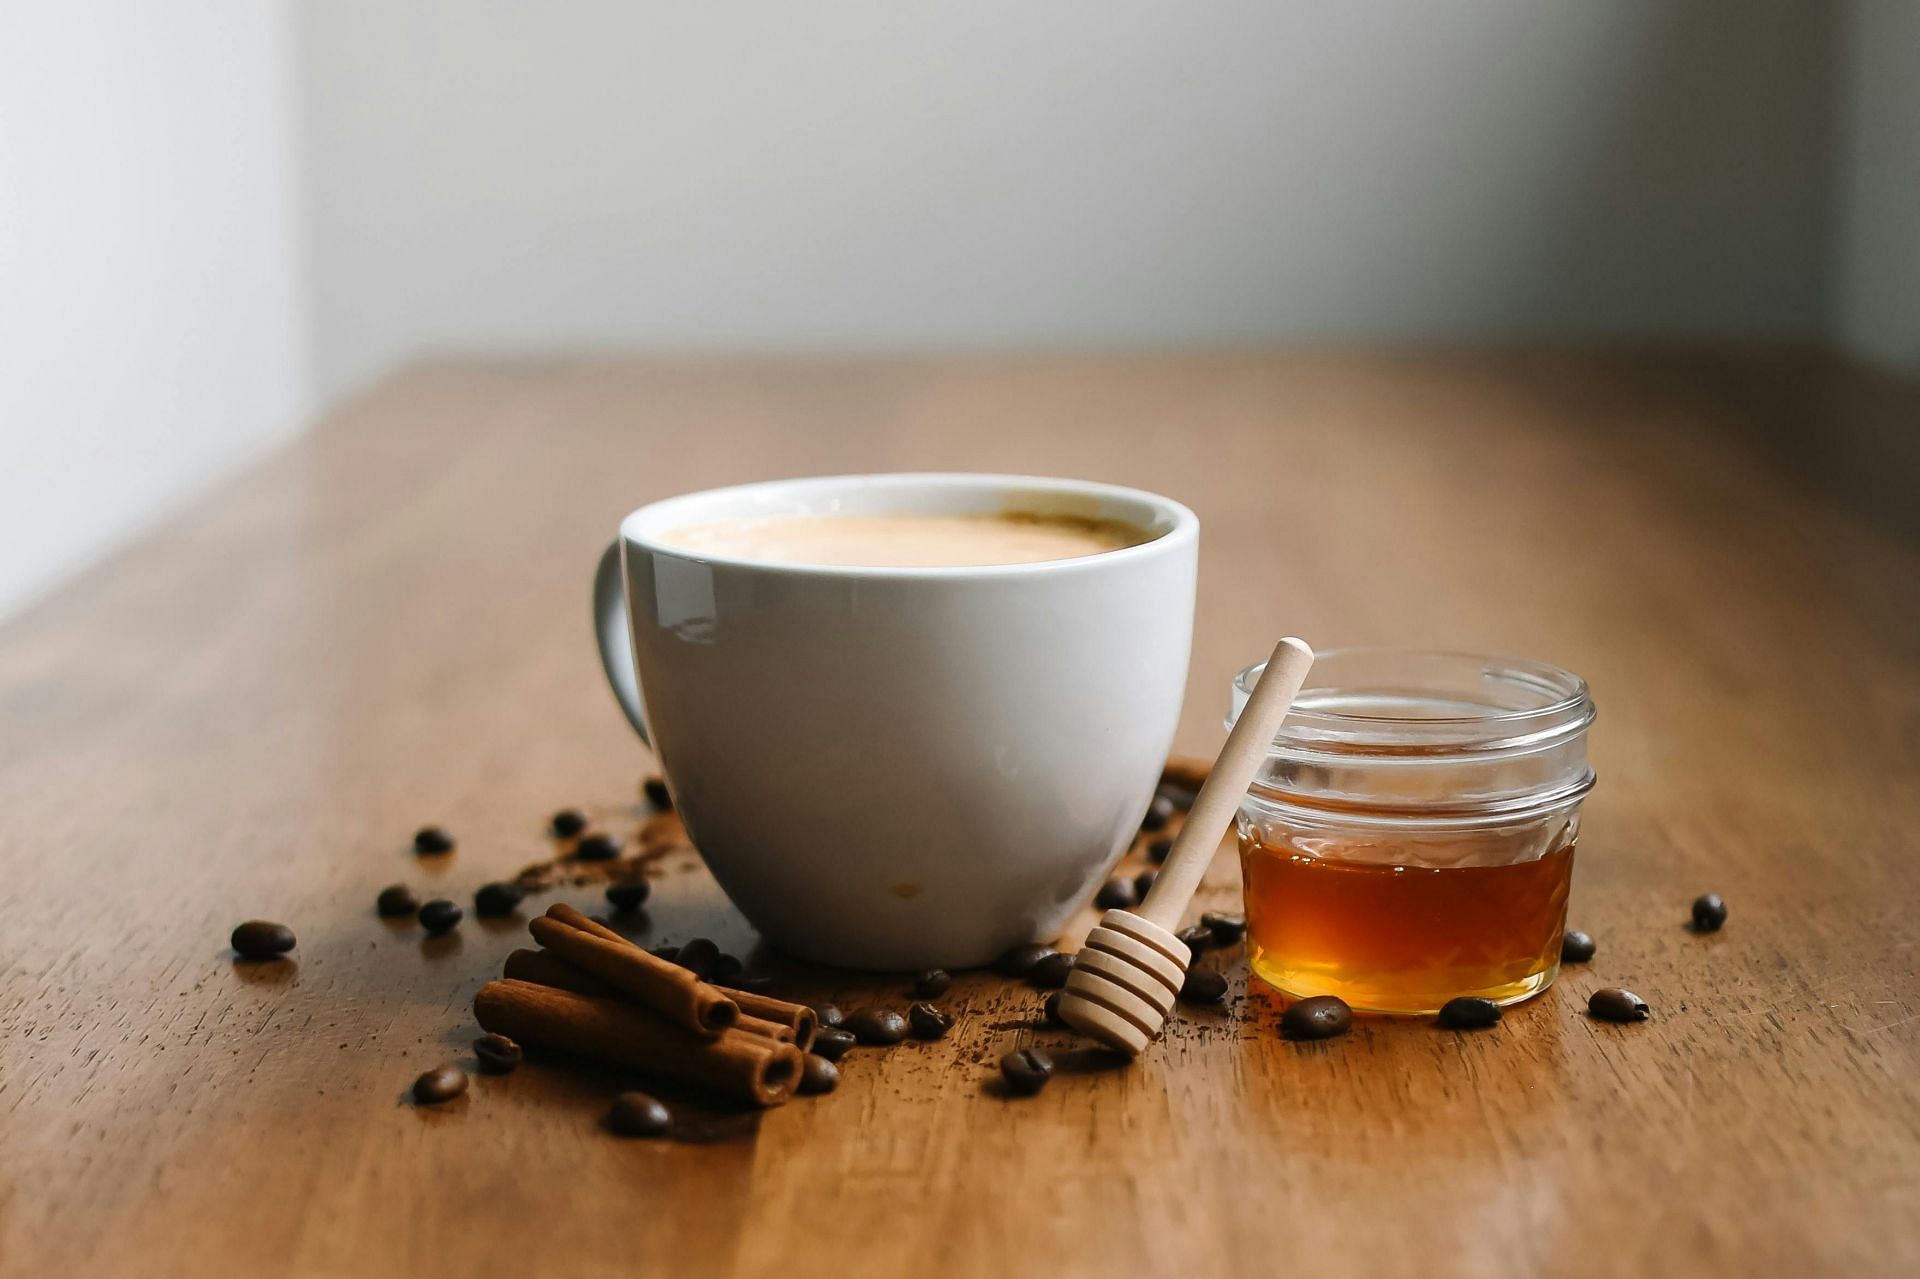 Reheating tea safely (image sourced via Pexels / Photo by Julissa)